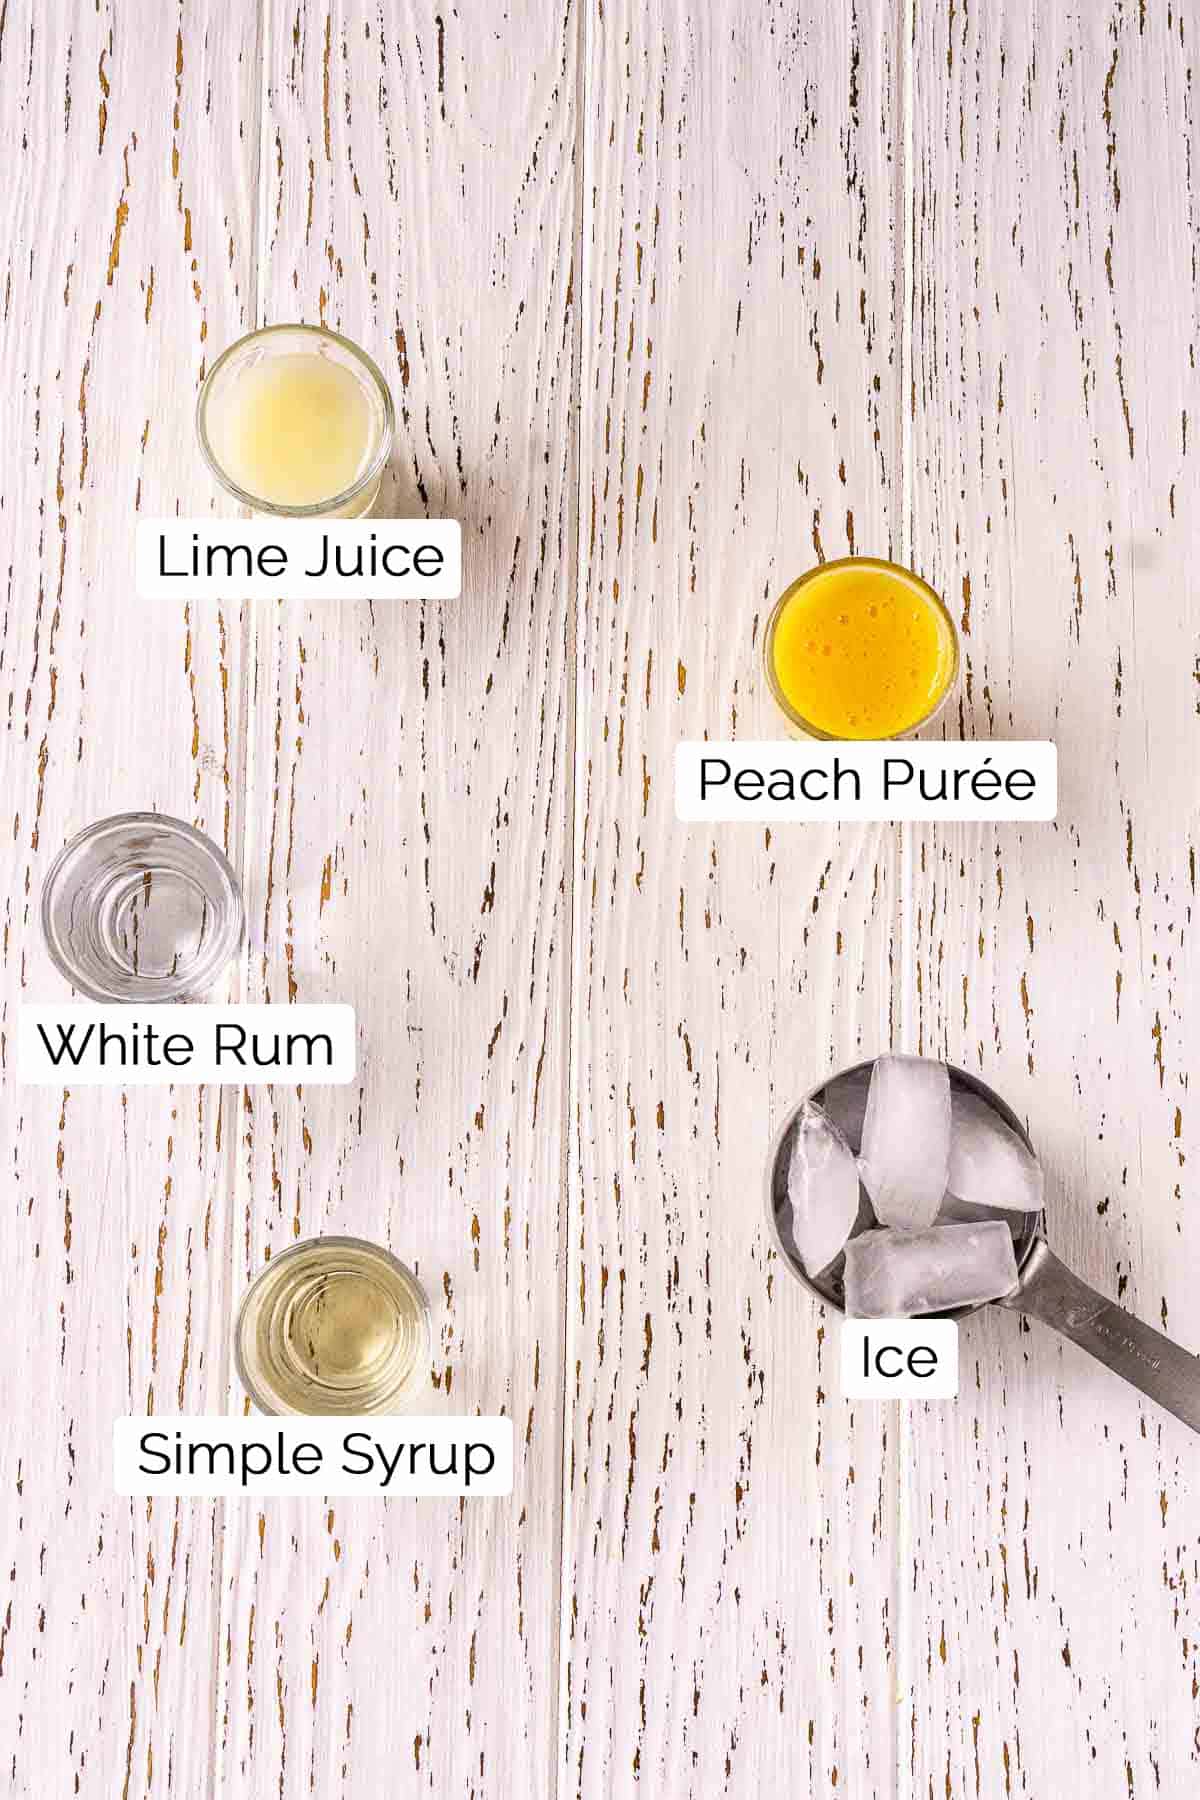 The drink ingredients with black and white labels underneath each item on a white wooden surface.